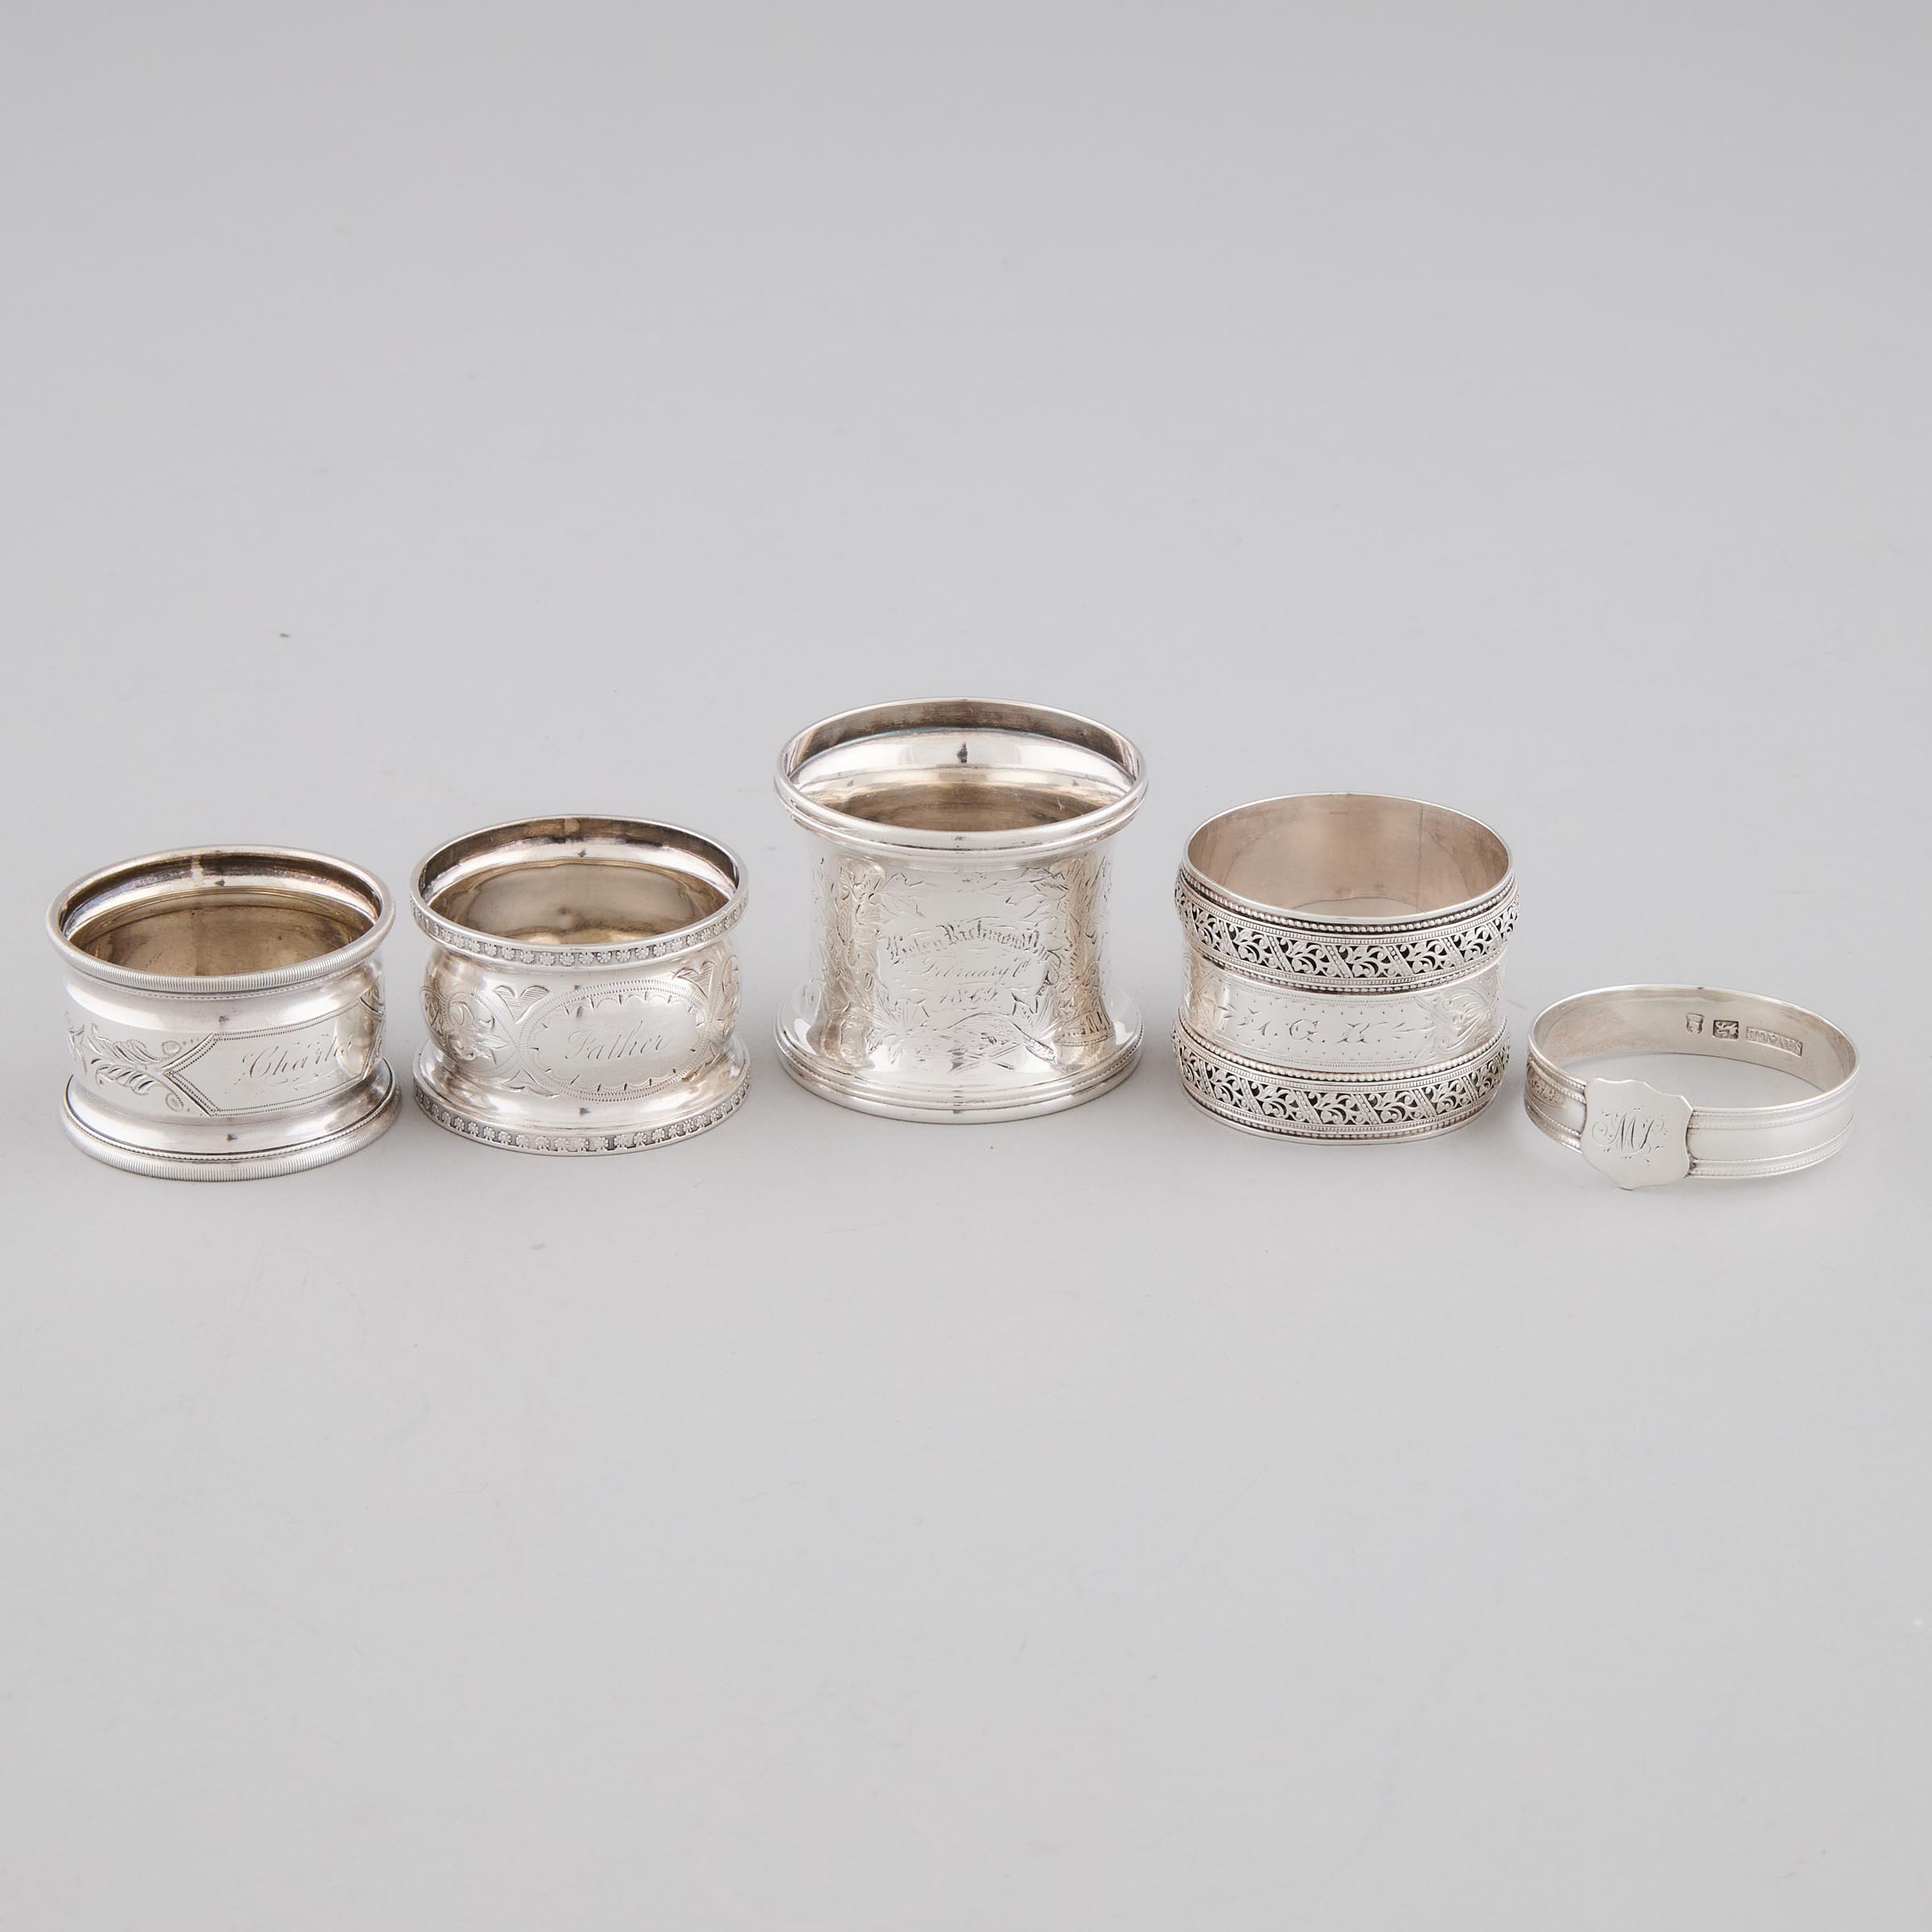 Five Canadian Silver Napkin Rings  2fb0464